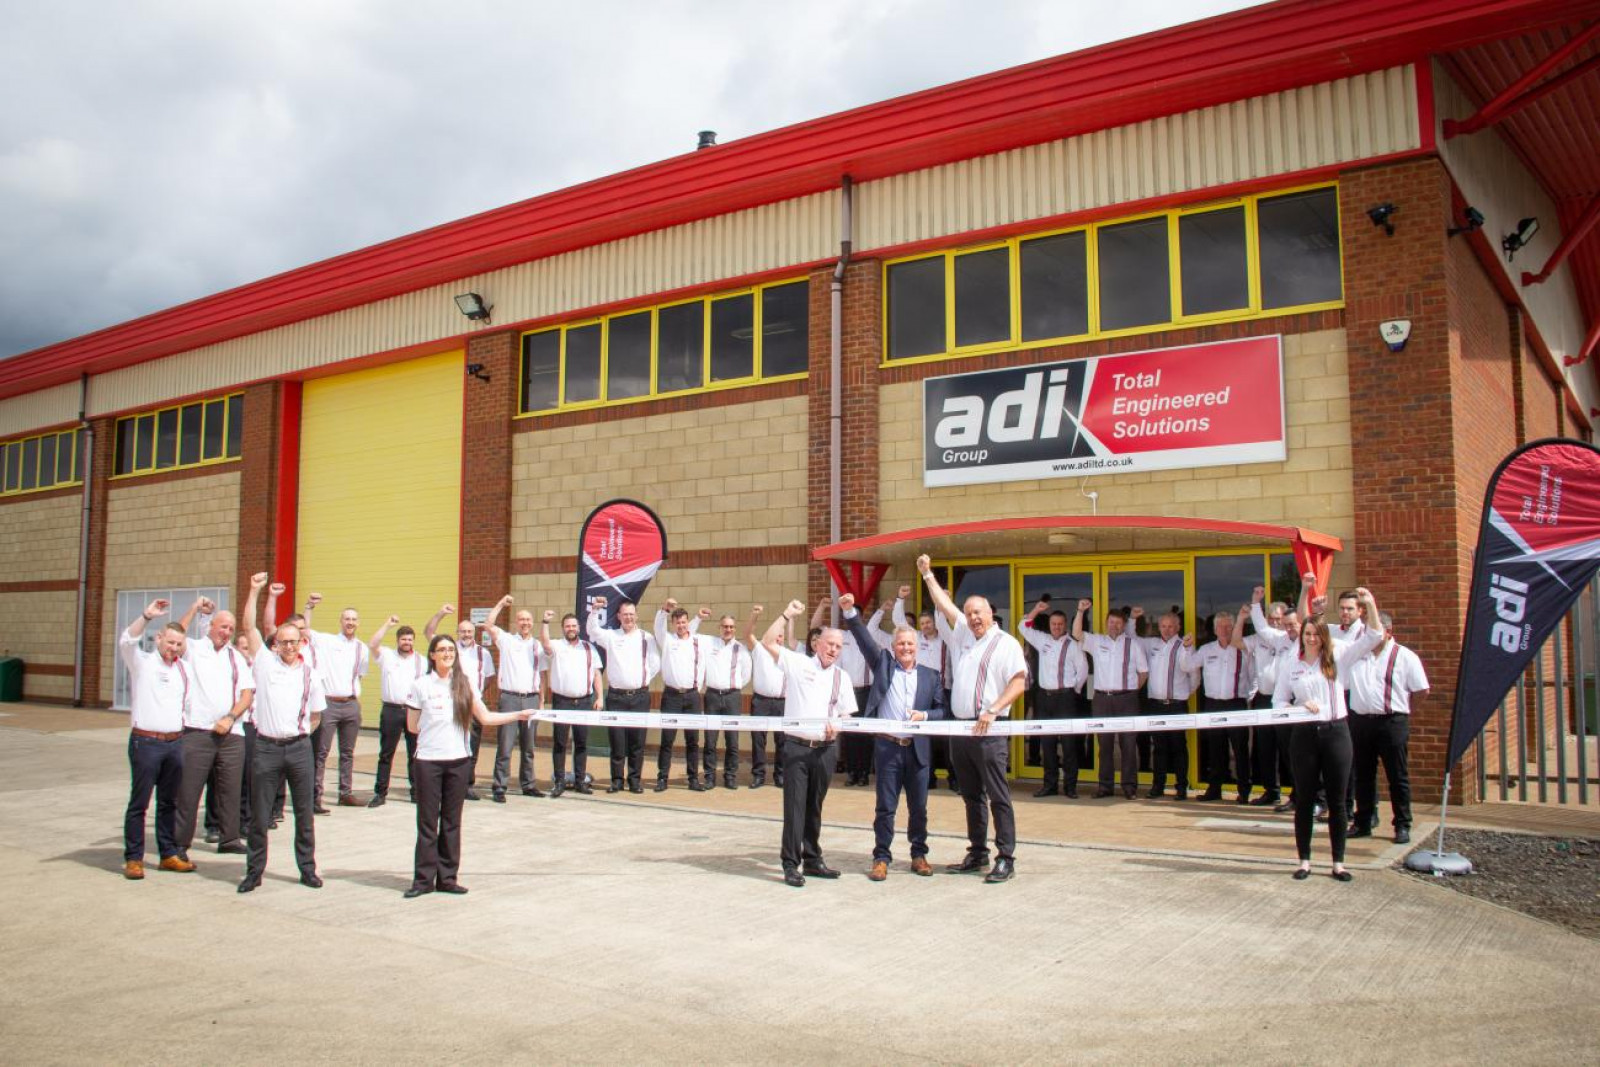 Leading engineering firm adi Group’s Environmental division expands workforce and service offering to meet consumer demand